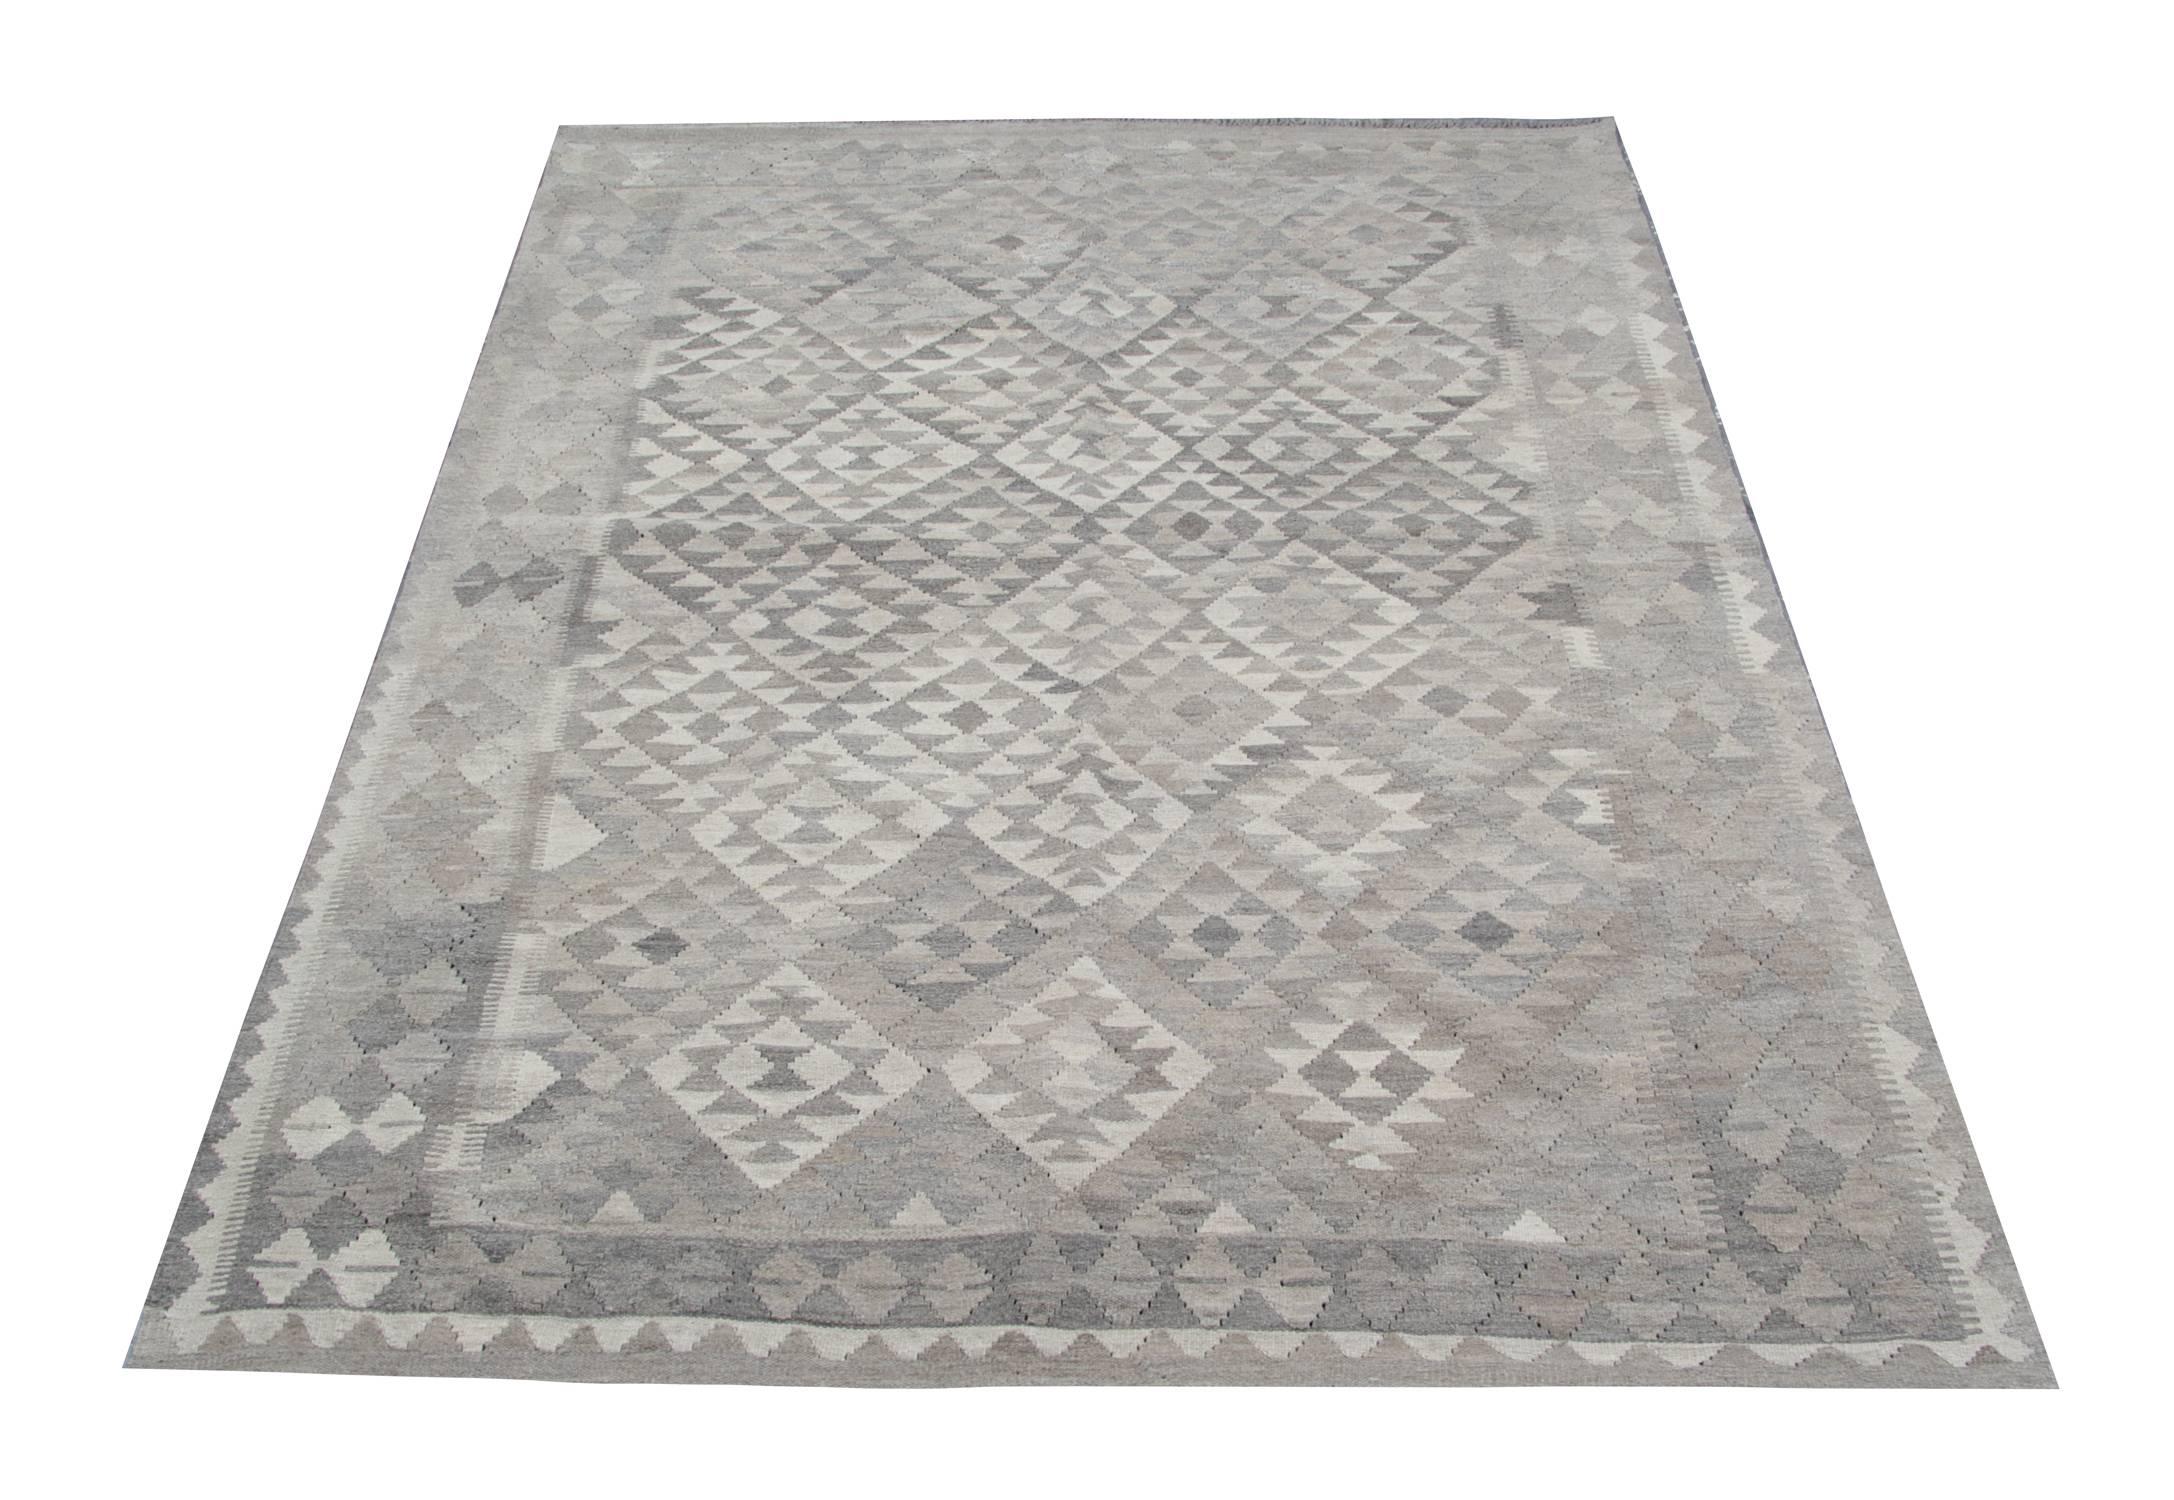 These traditional rugs are handwoven by the very skilled weaver in Afghanistan by Uzbek and Turkmen tribes, it reflects the best kilims weaving traditions. These handmade rugs are woven in locally sourced wool and cotton and are made using only